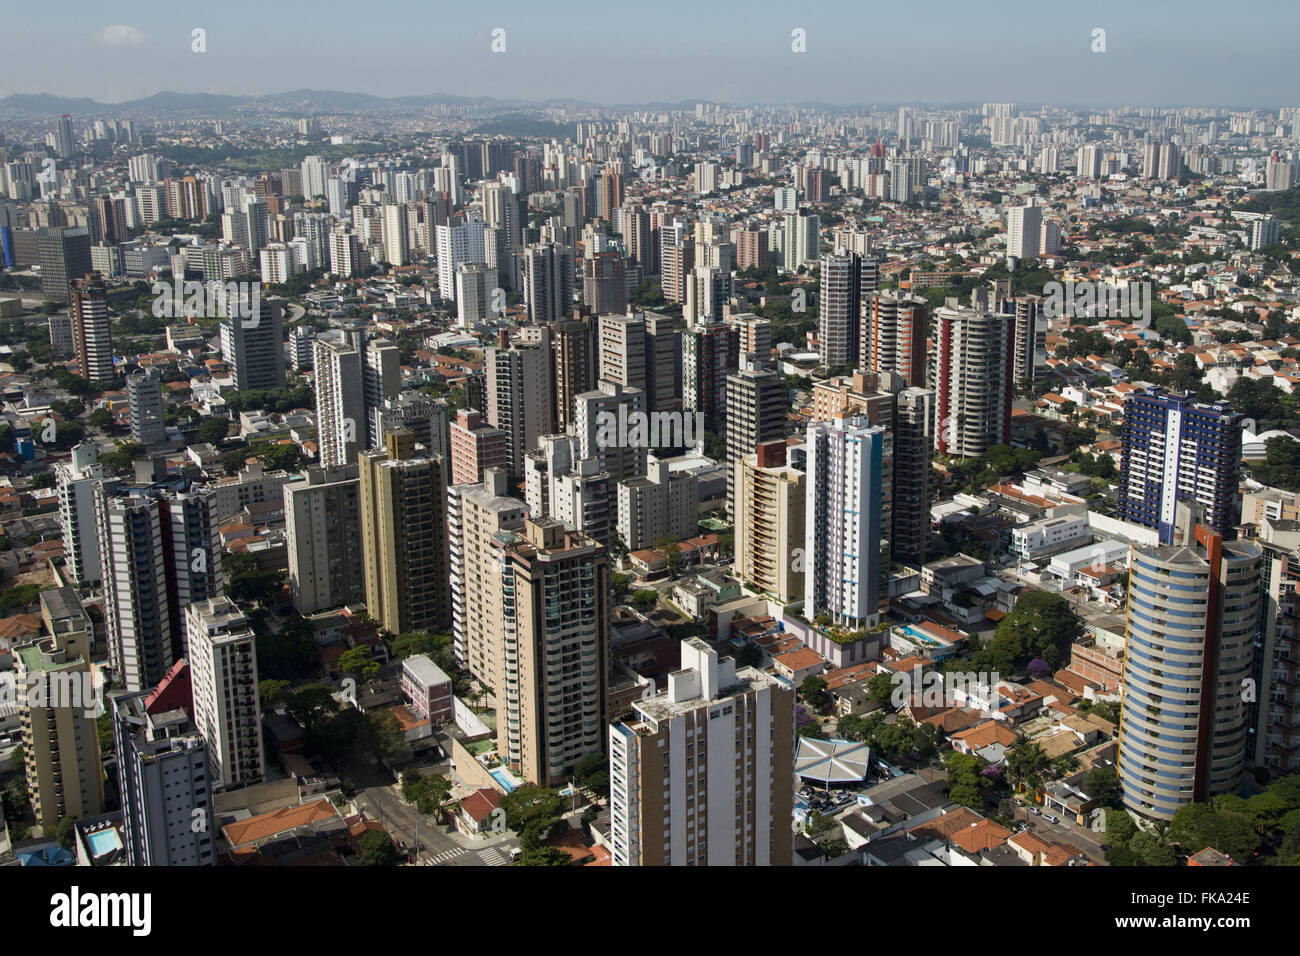 Aerial view of buildings in the city district Stock Photo